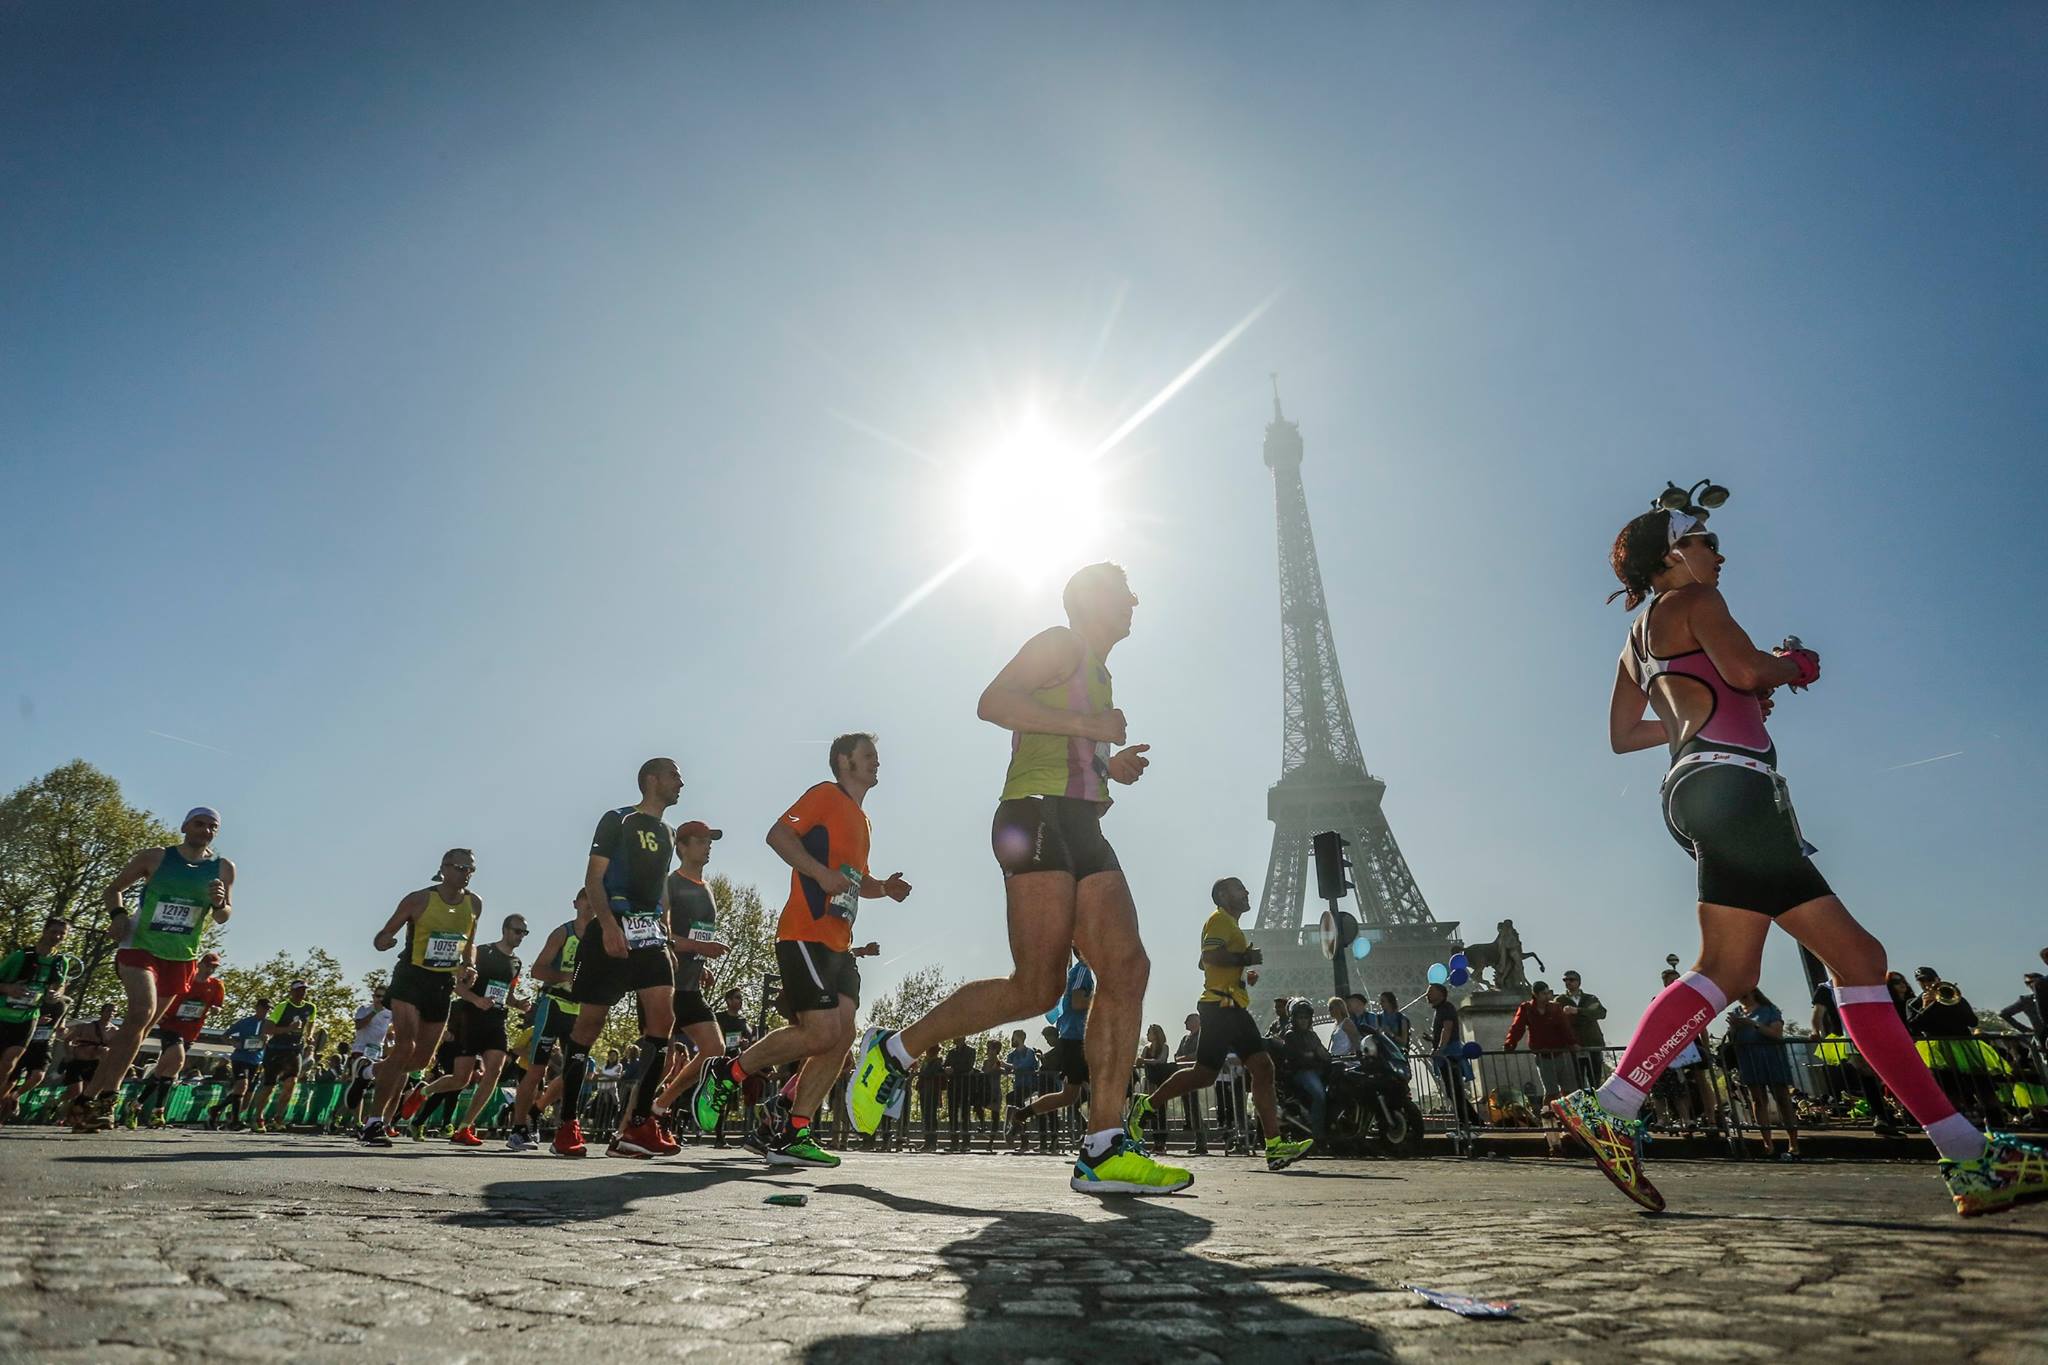 Runners at the Paris Marathon. The Eiffel Tower can be seen in the background